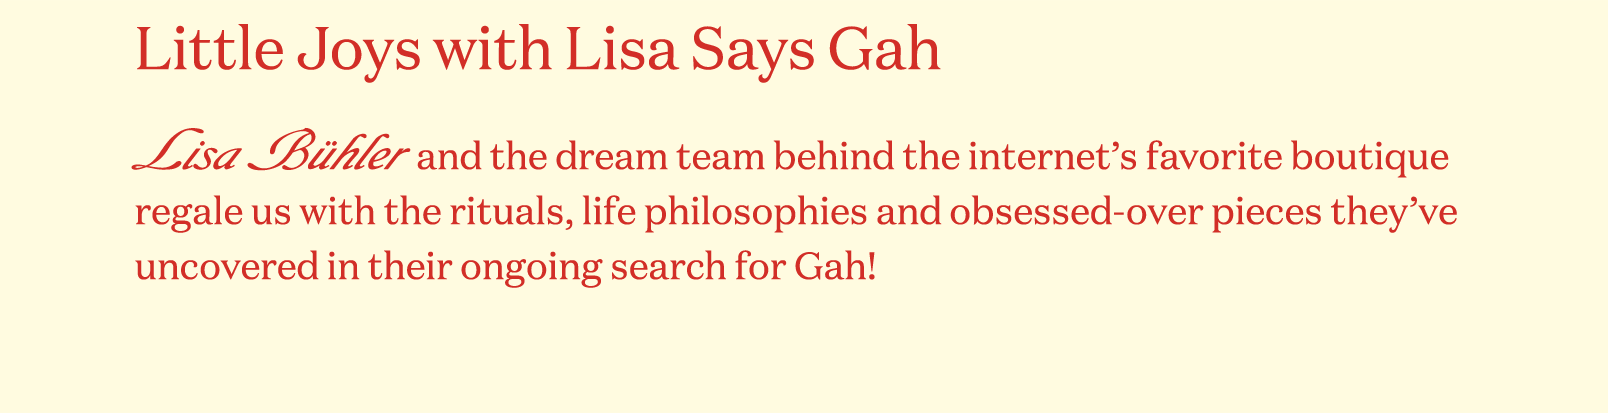 A Q&A with Lisa Bühler and the team at Lisa Says Gah.